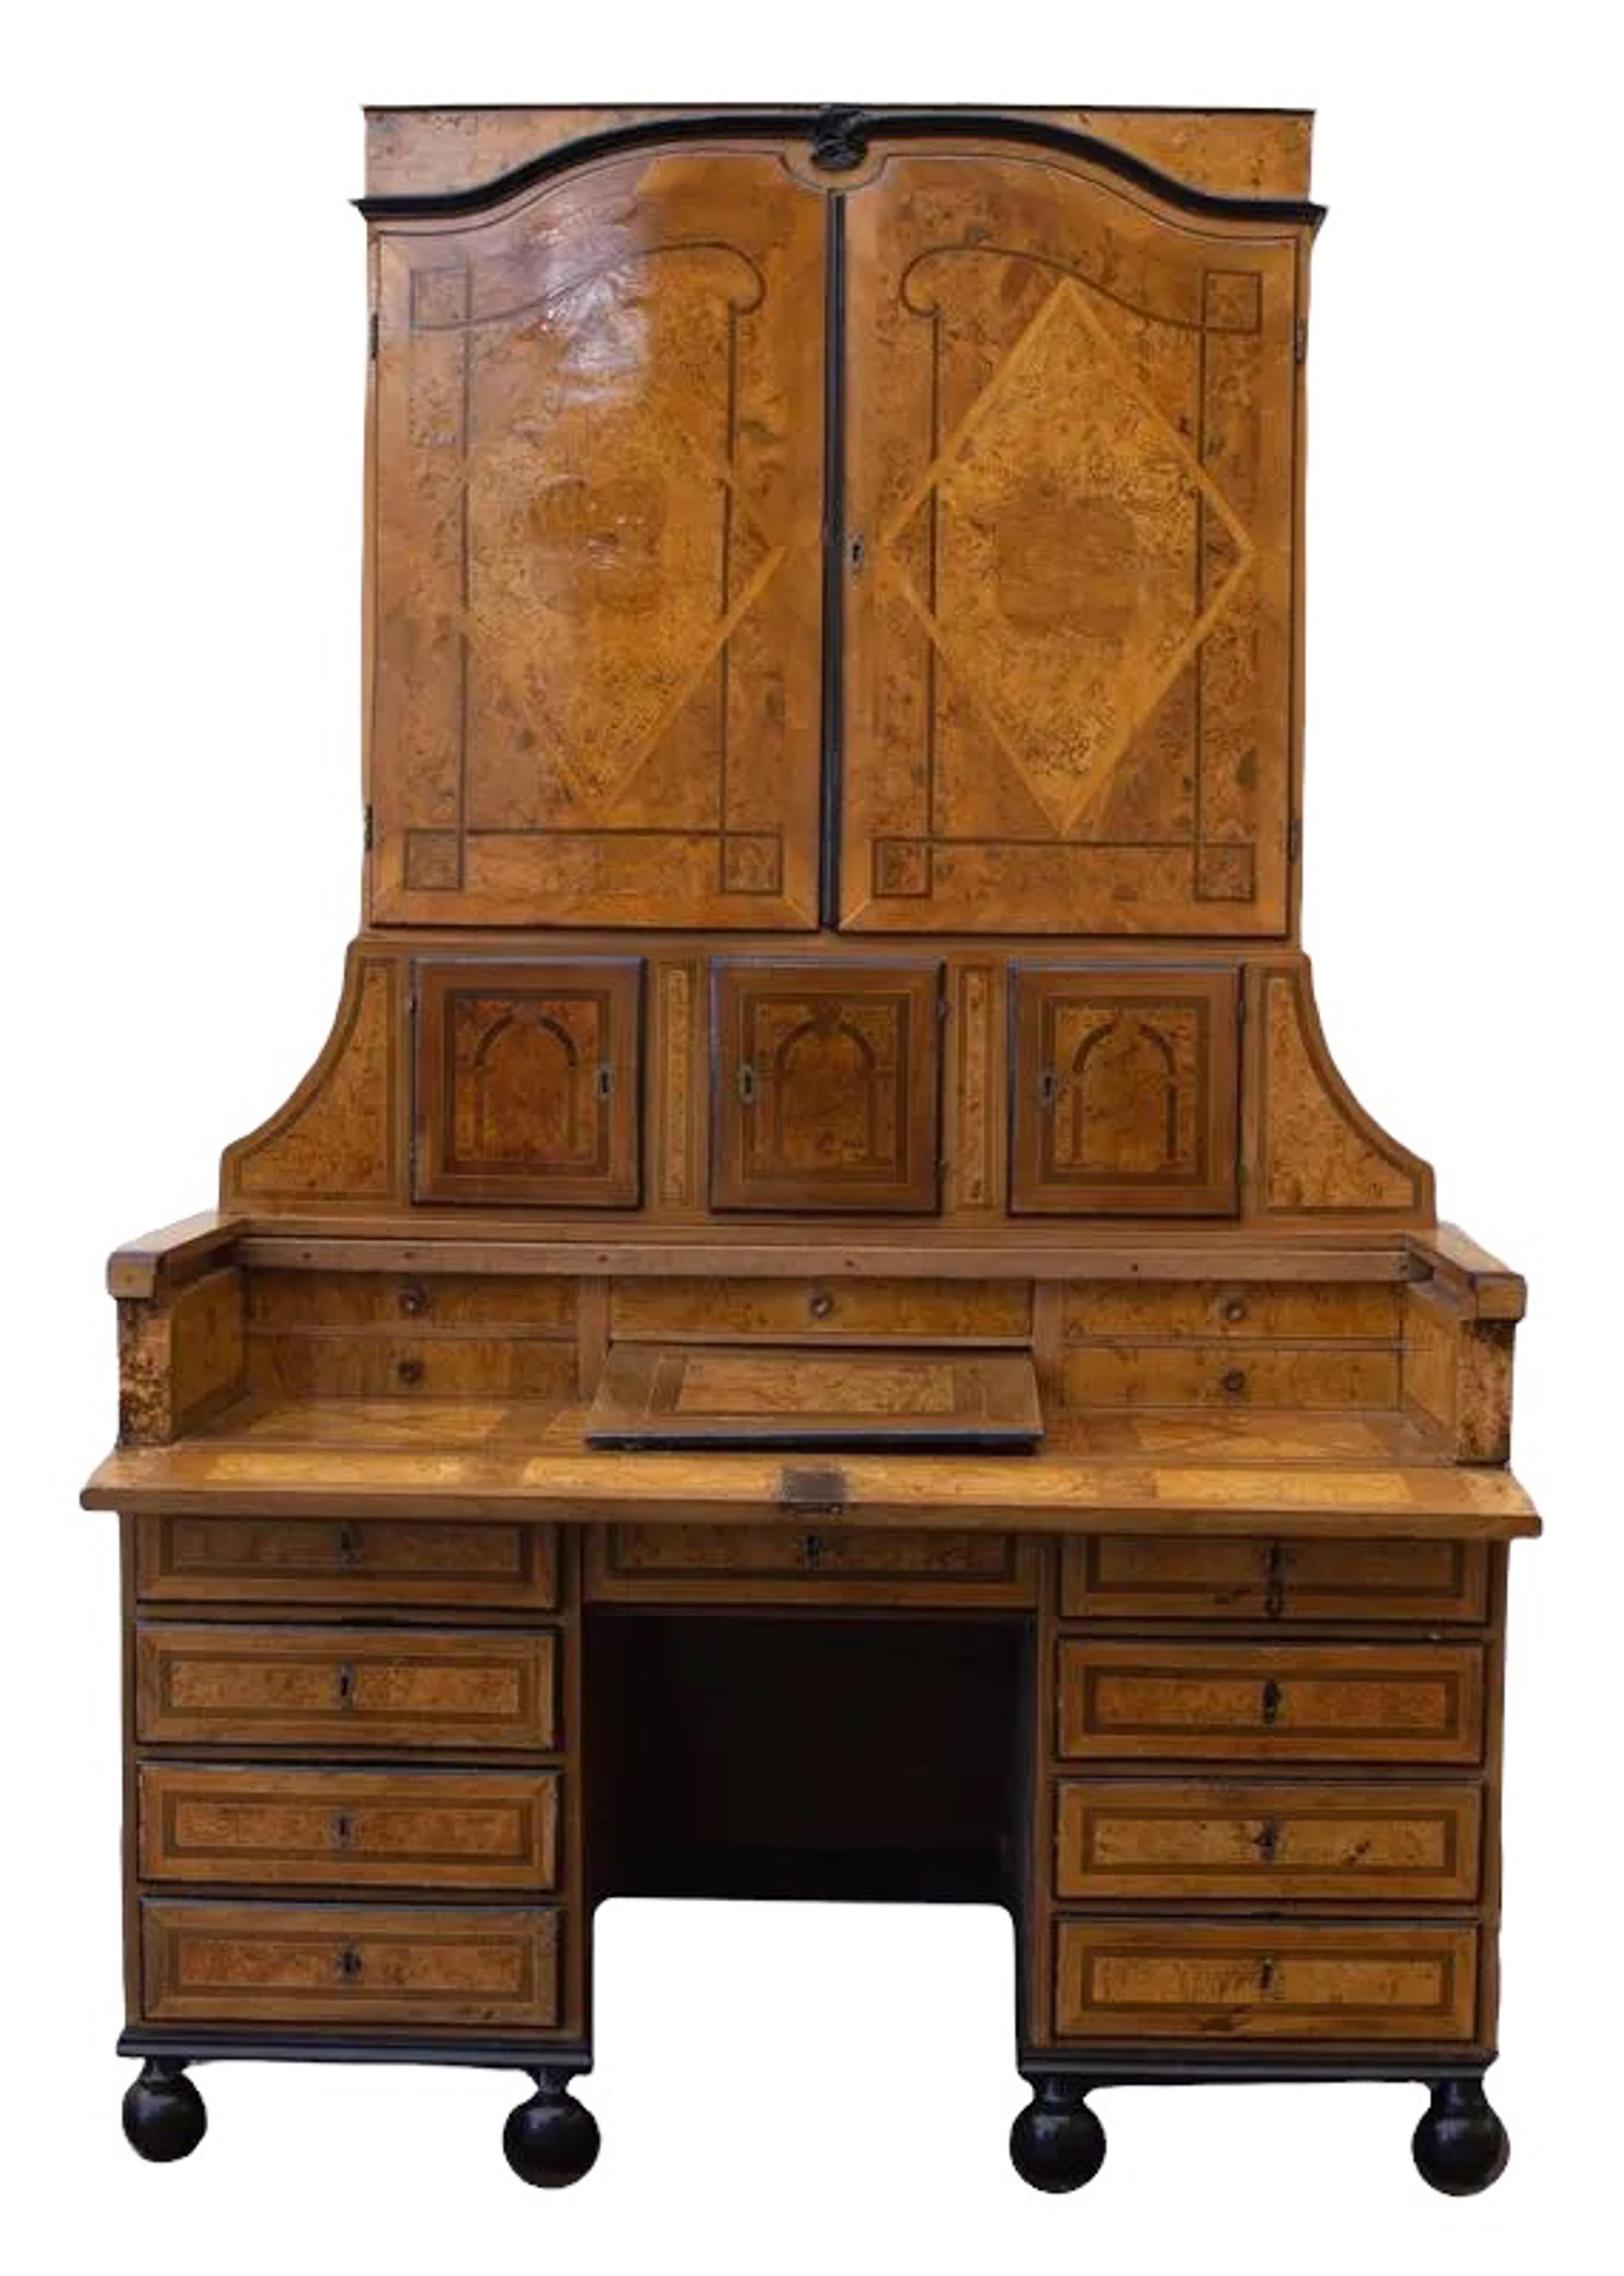 18th Century German burr elm and walnut secretary, adorned with ebonized trim and inlaid decorations and patterns. A pair of paneled doors over three small cupboards with beautiful details, over a pull-out writing surface with fitted interior, the